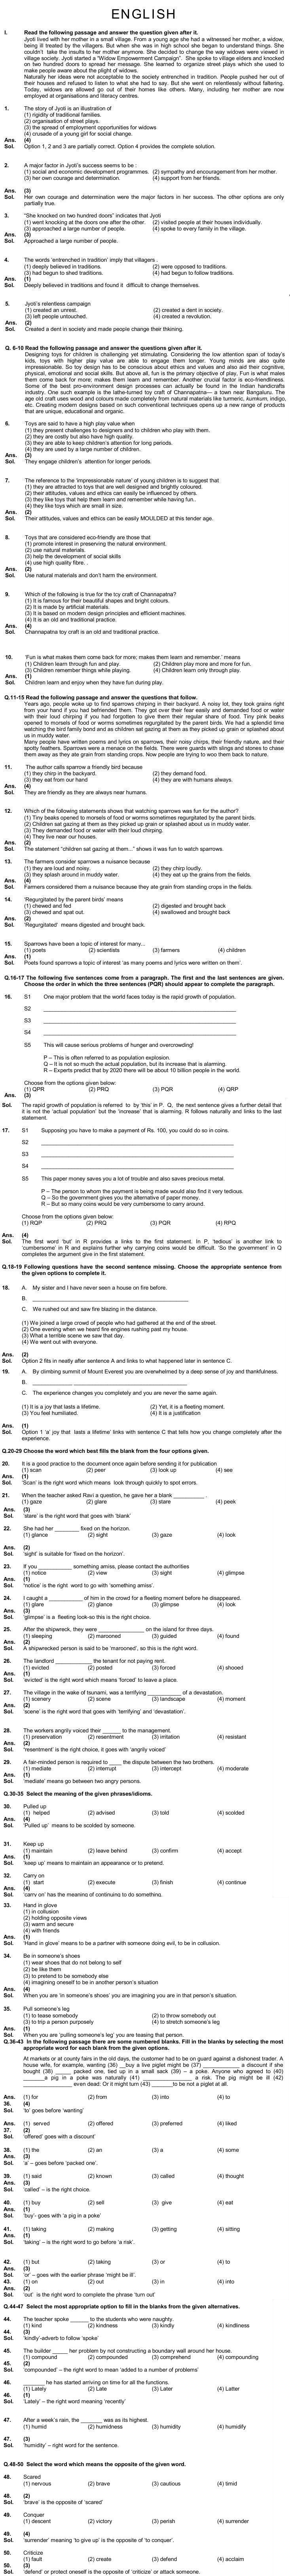 NTSE 2013 Stage II Question Paper and Solutions - Language Test